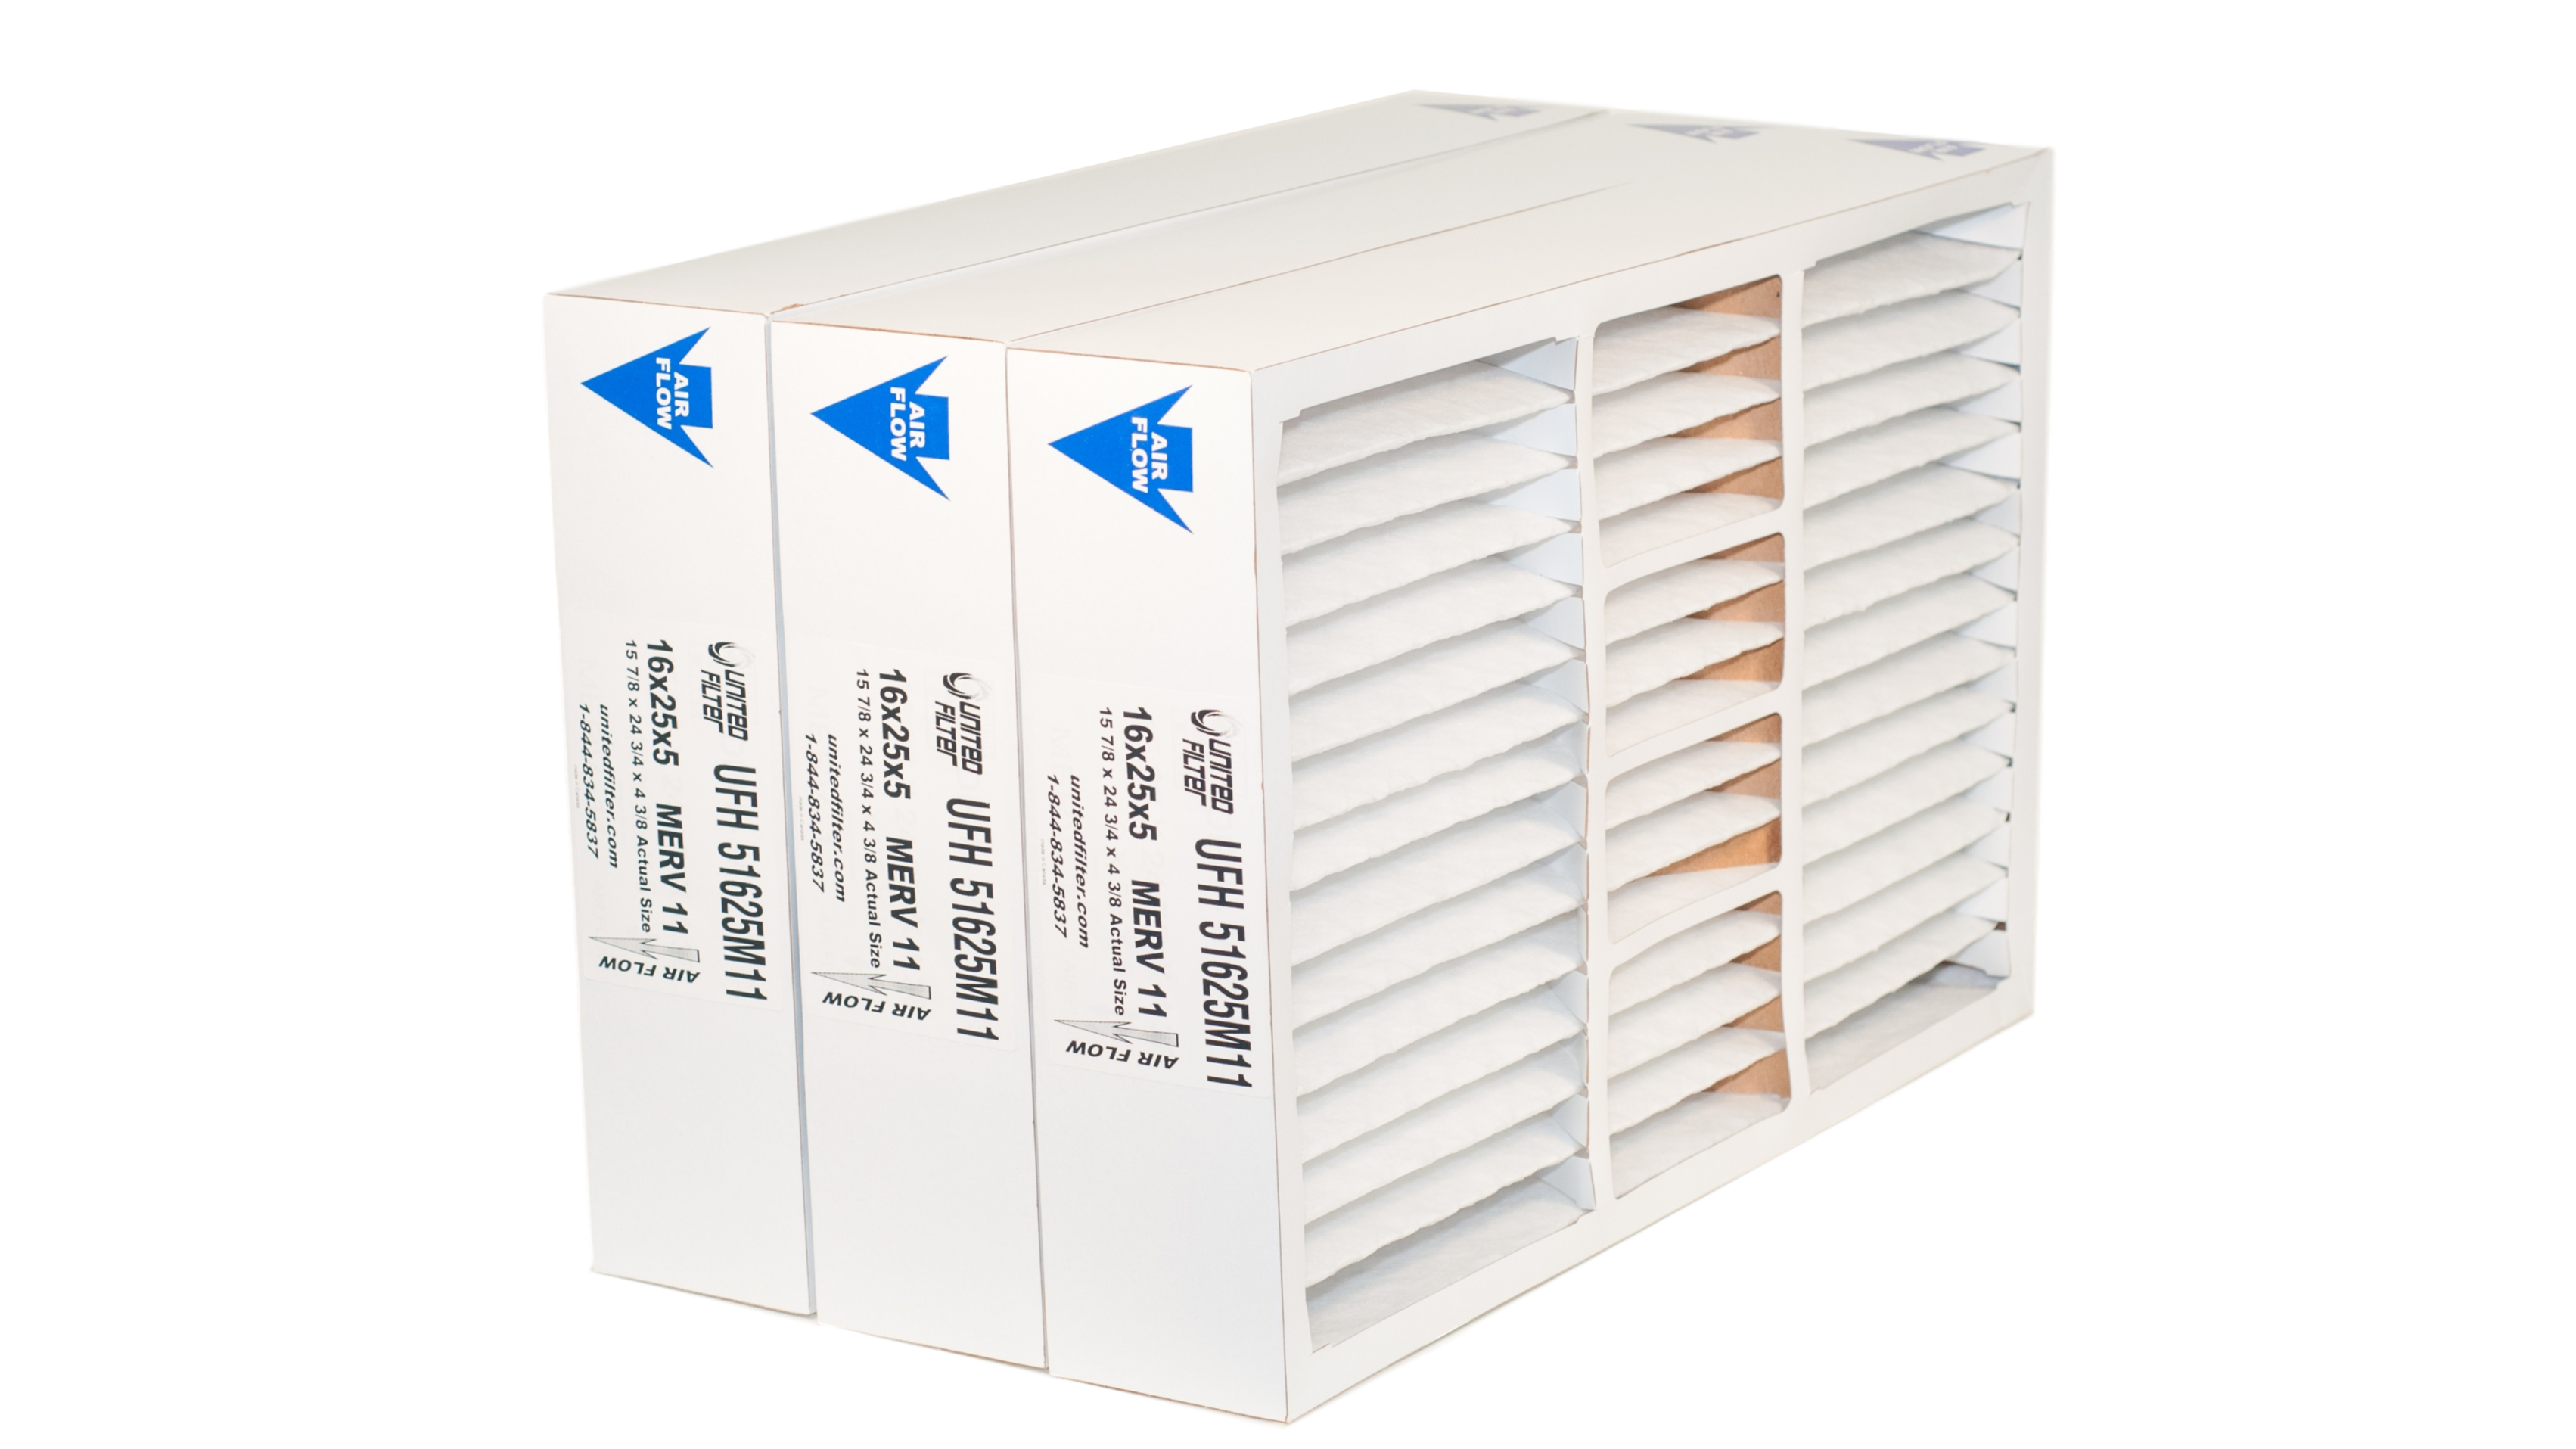 Top Furnace Filter Distributor Offers High Efficiency 20x25x5 Honeywell Filters